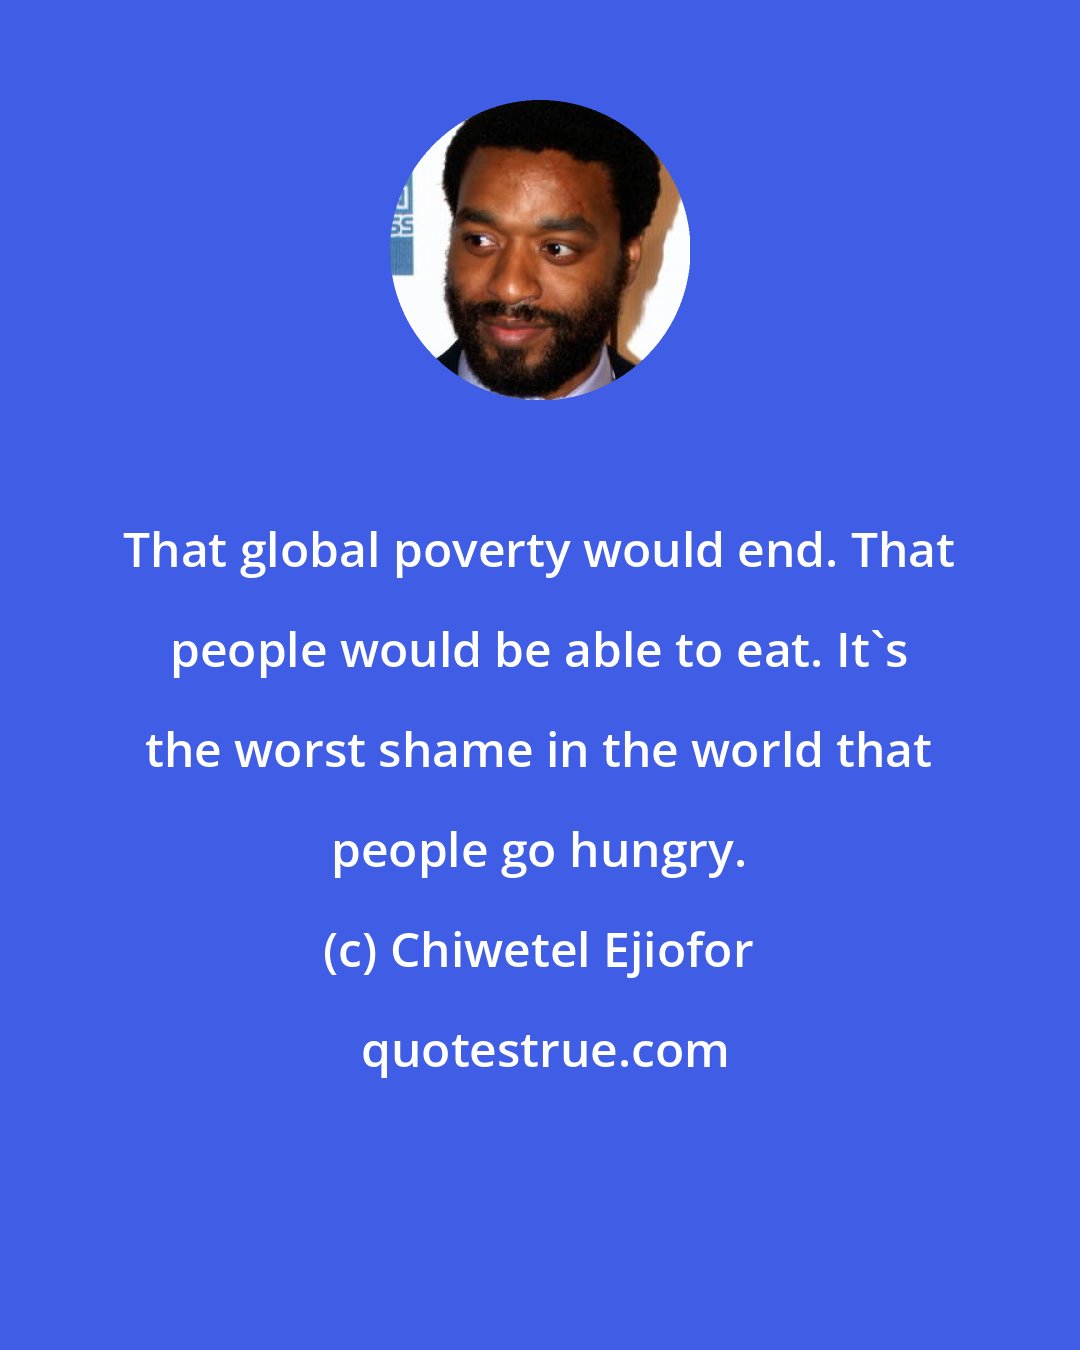 Chiwetel Ejiofor: That global poverty would end. That people would be able to eat. It's the worst shame in the world that people go hungry.